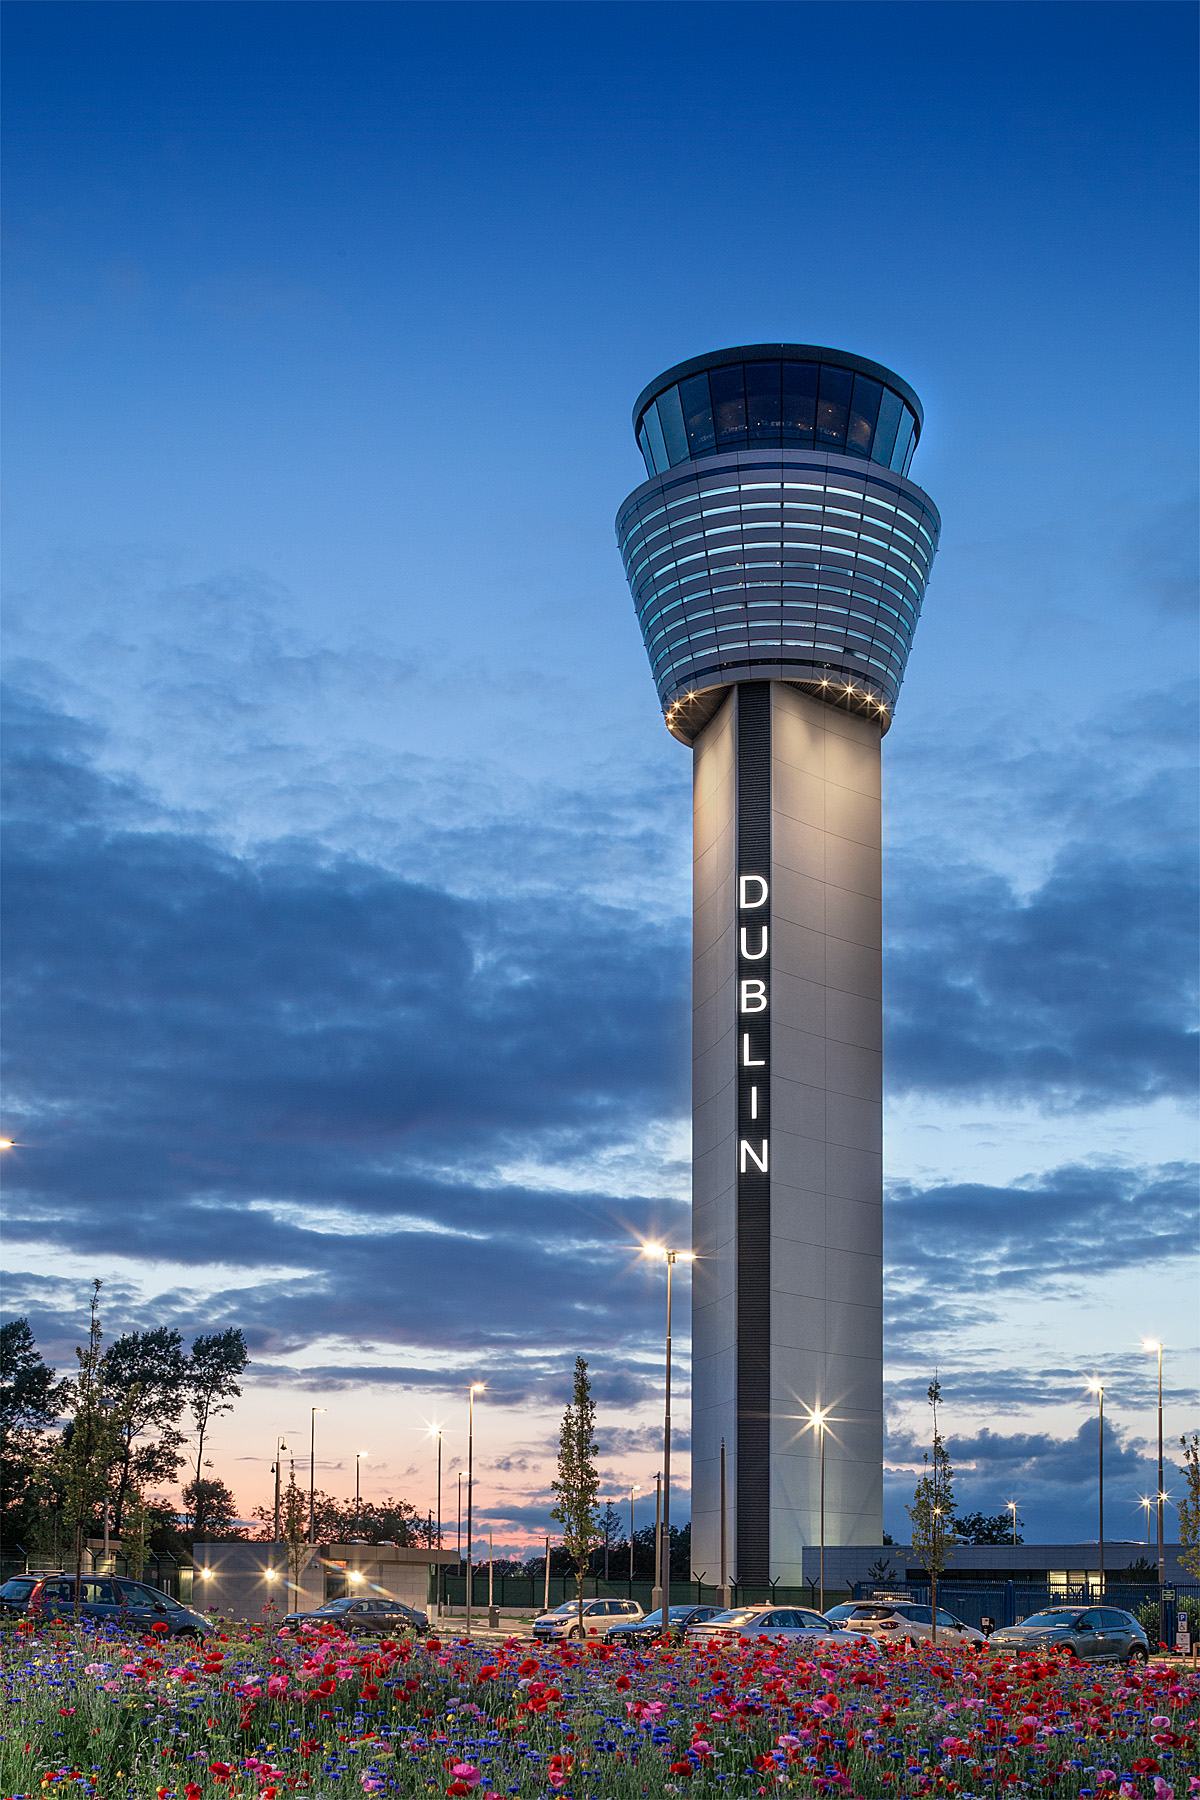 Dublin Air Traffic Control Tower against blue dusk sky with red poppies in foreground